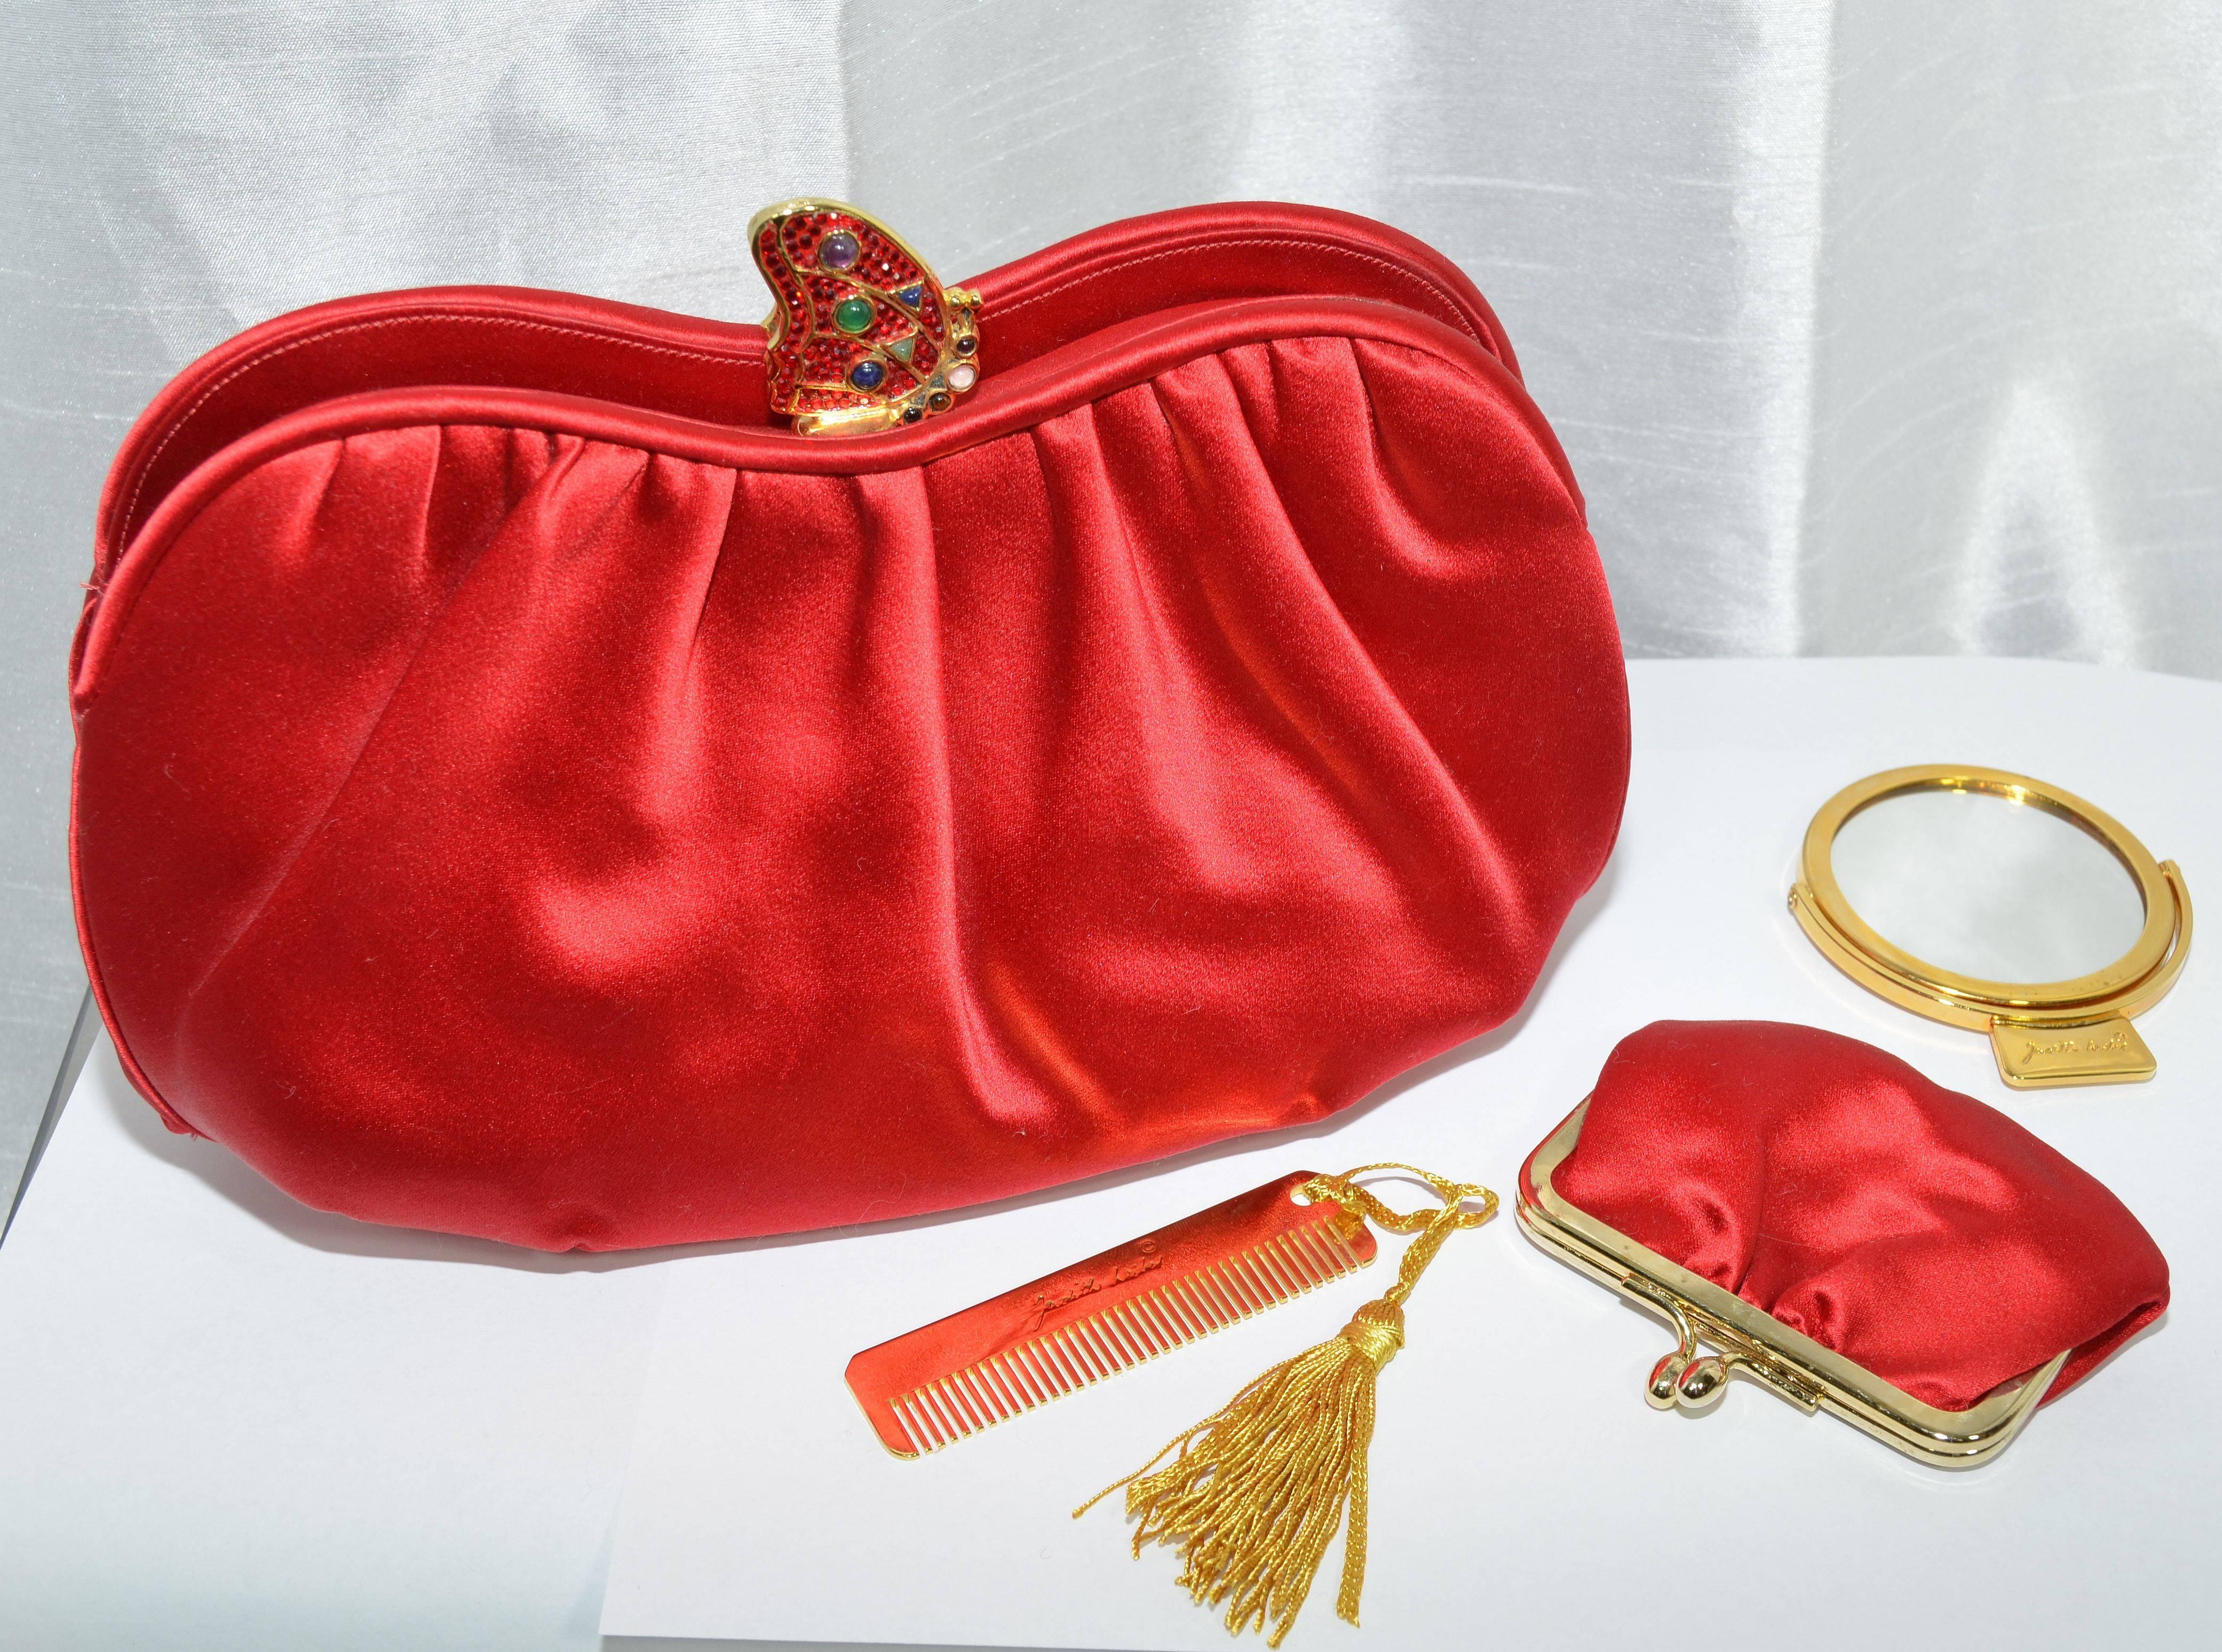 Gorgeous Judith Leiber clutch featured in a blue red satin fabric with a slightly ruched opening. There are three separate compartments with the center compartment including one zipper pocket and one slip pocket, with a gold-tone jeweled metal